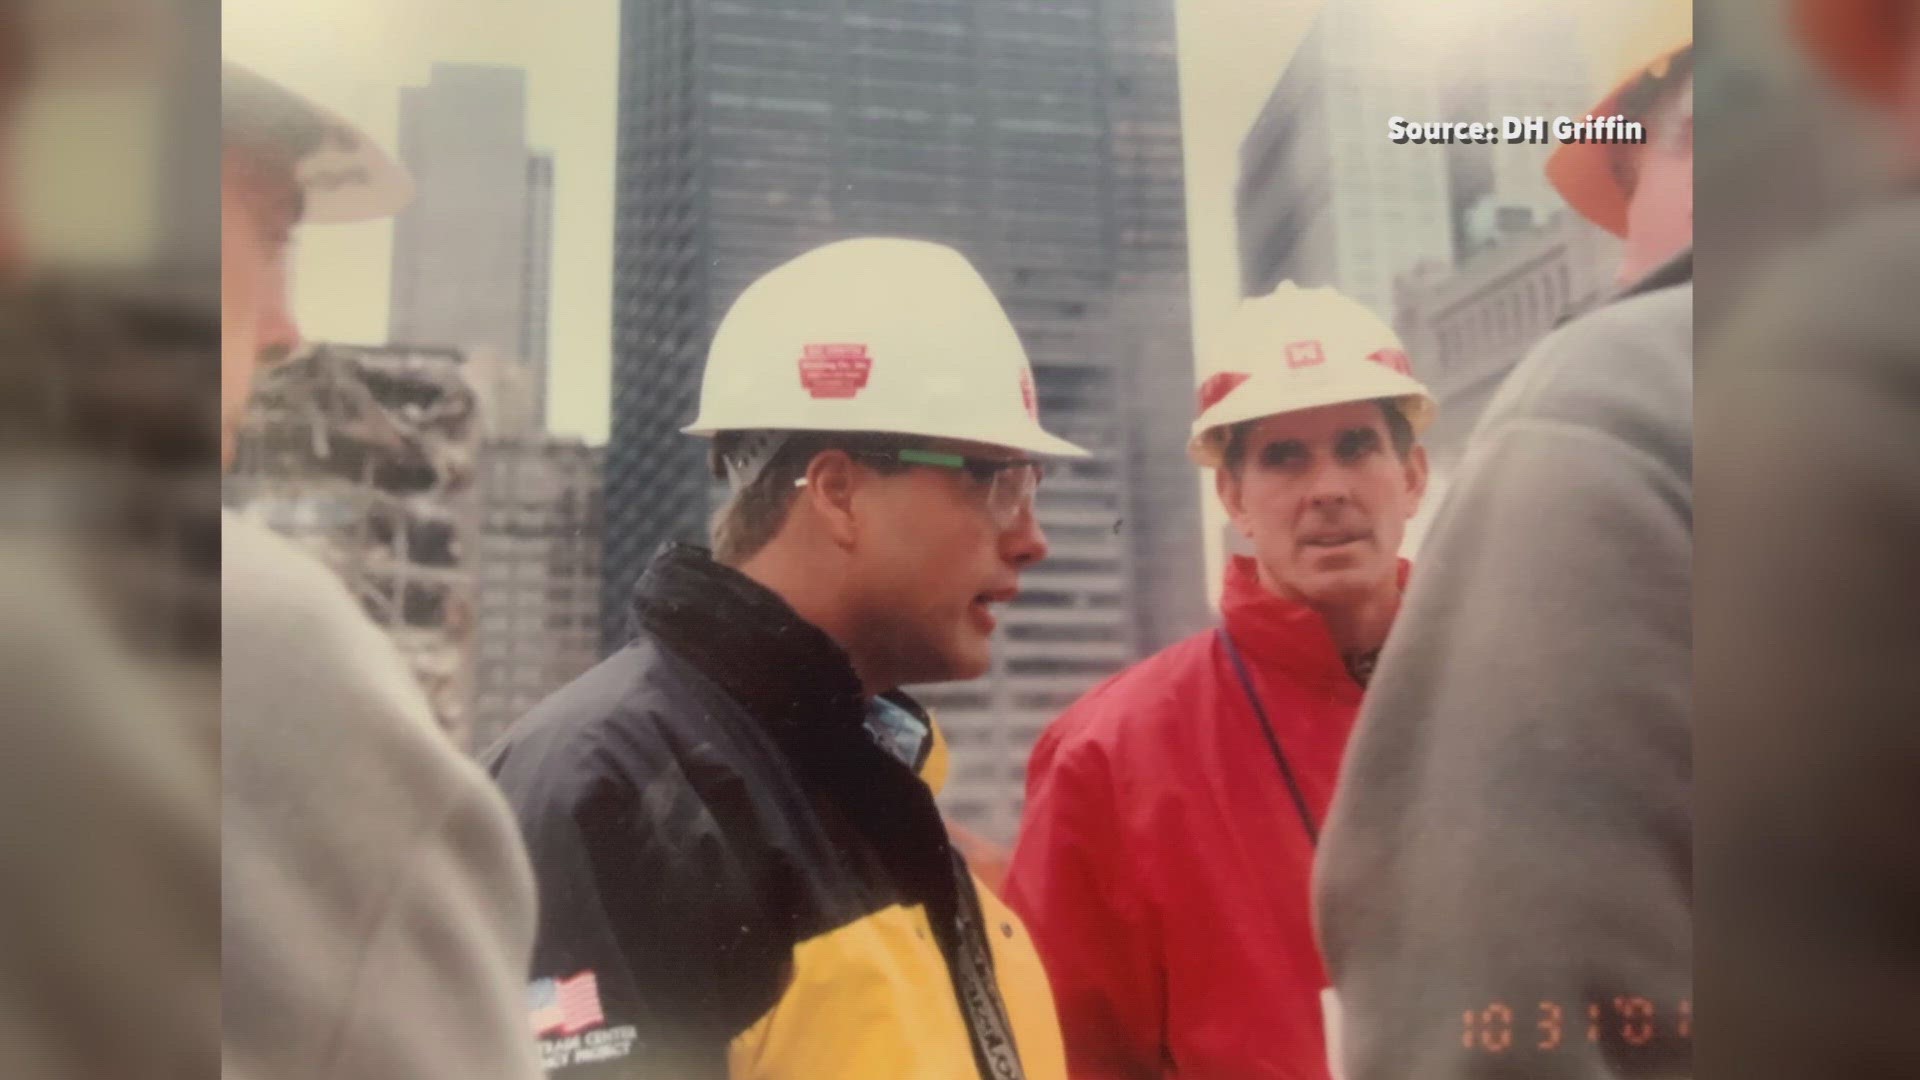 The Greensboro business owner oversaw cleanup and spent nine months at Ground Zero.